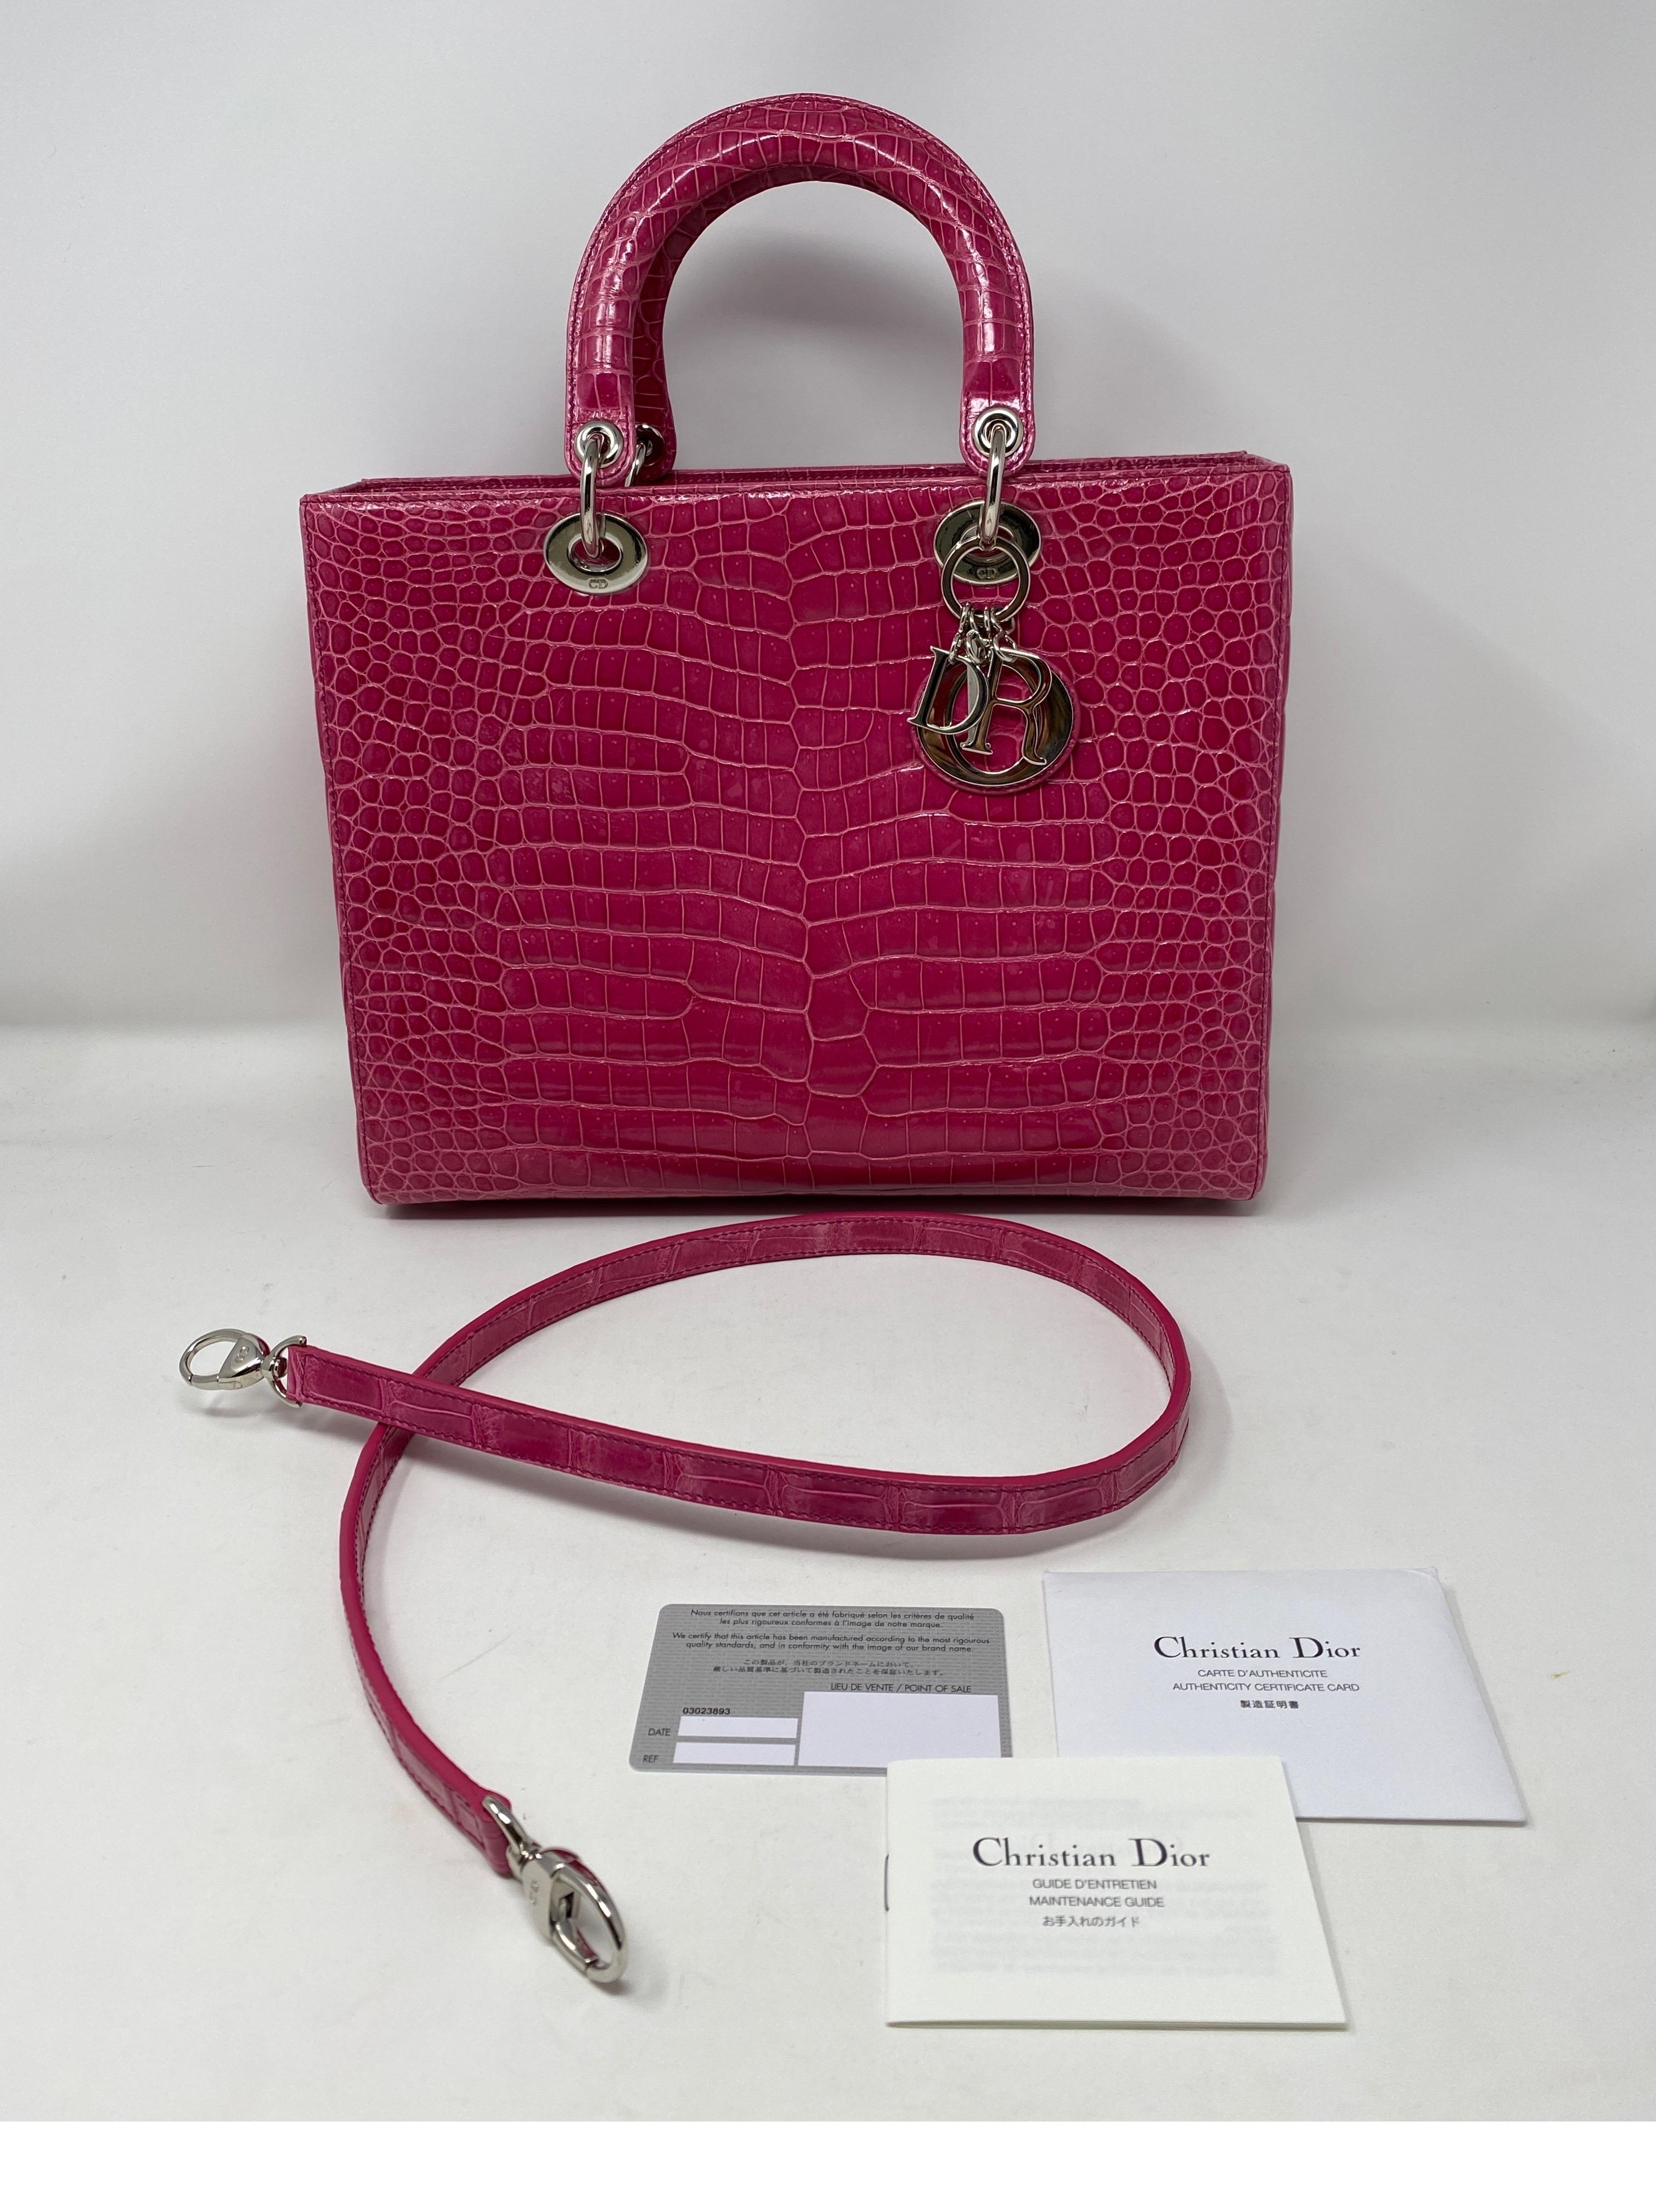 Christian Dior Lady Pink Crocodile Bag. Absolutely stunning Lady Dior bag. Mint like new condition. Beautiful hot pink color exotic crocodile. Silver hardware. Large size Lady bag with removable crocodile strap. Don't miss out on this amazing